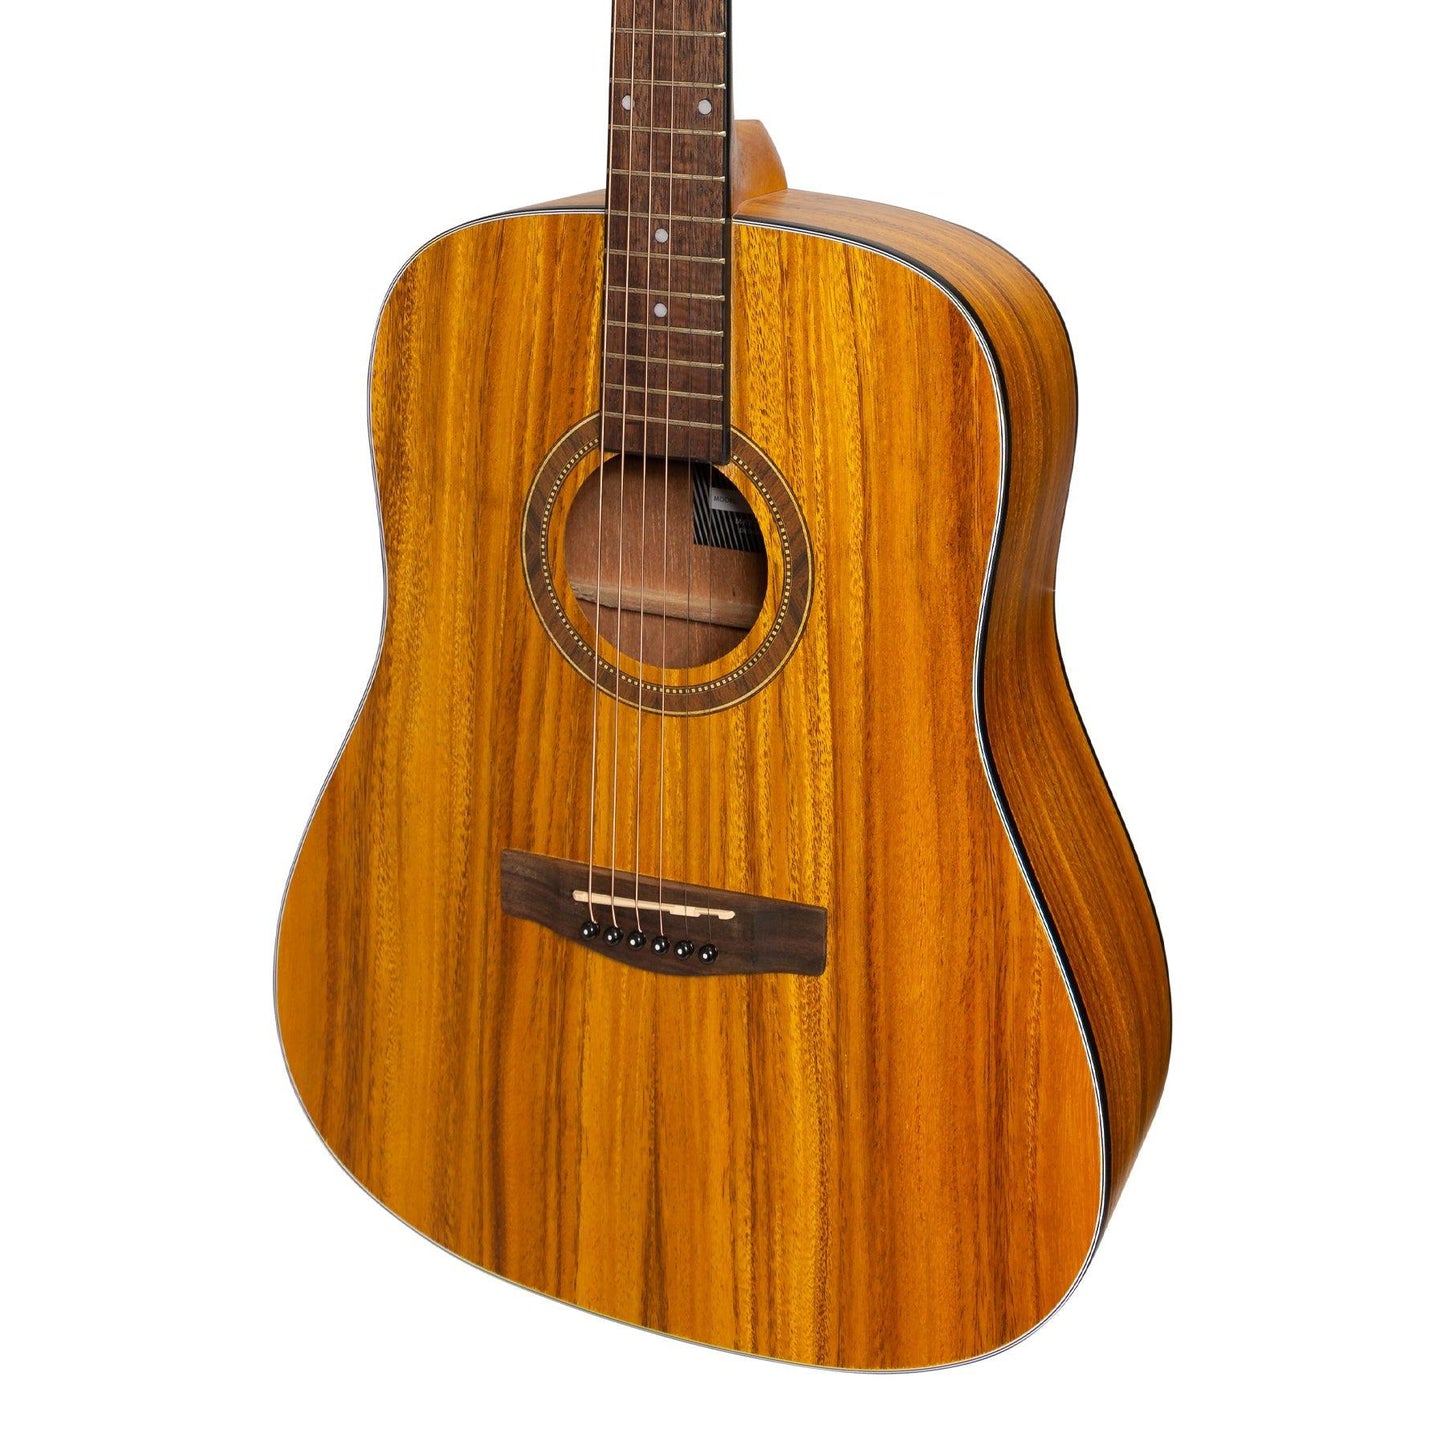 Martinez '41 Series' Dreadnought Acoustic Guitar Pack with Built-in Tuner (Koa)